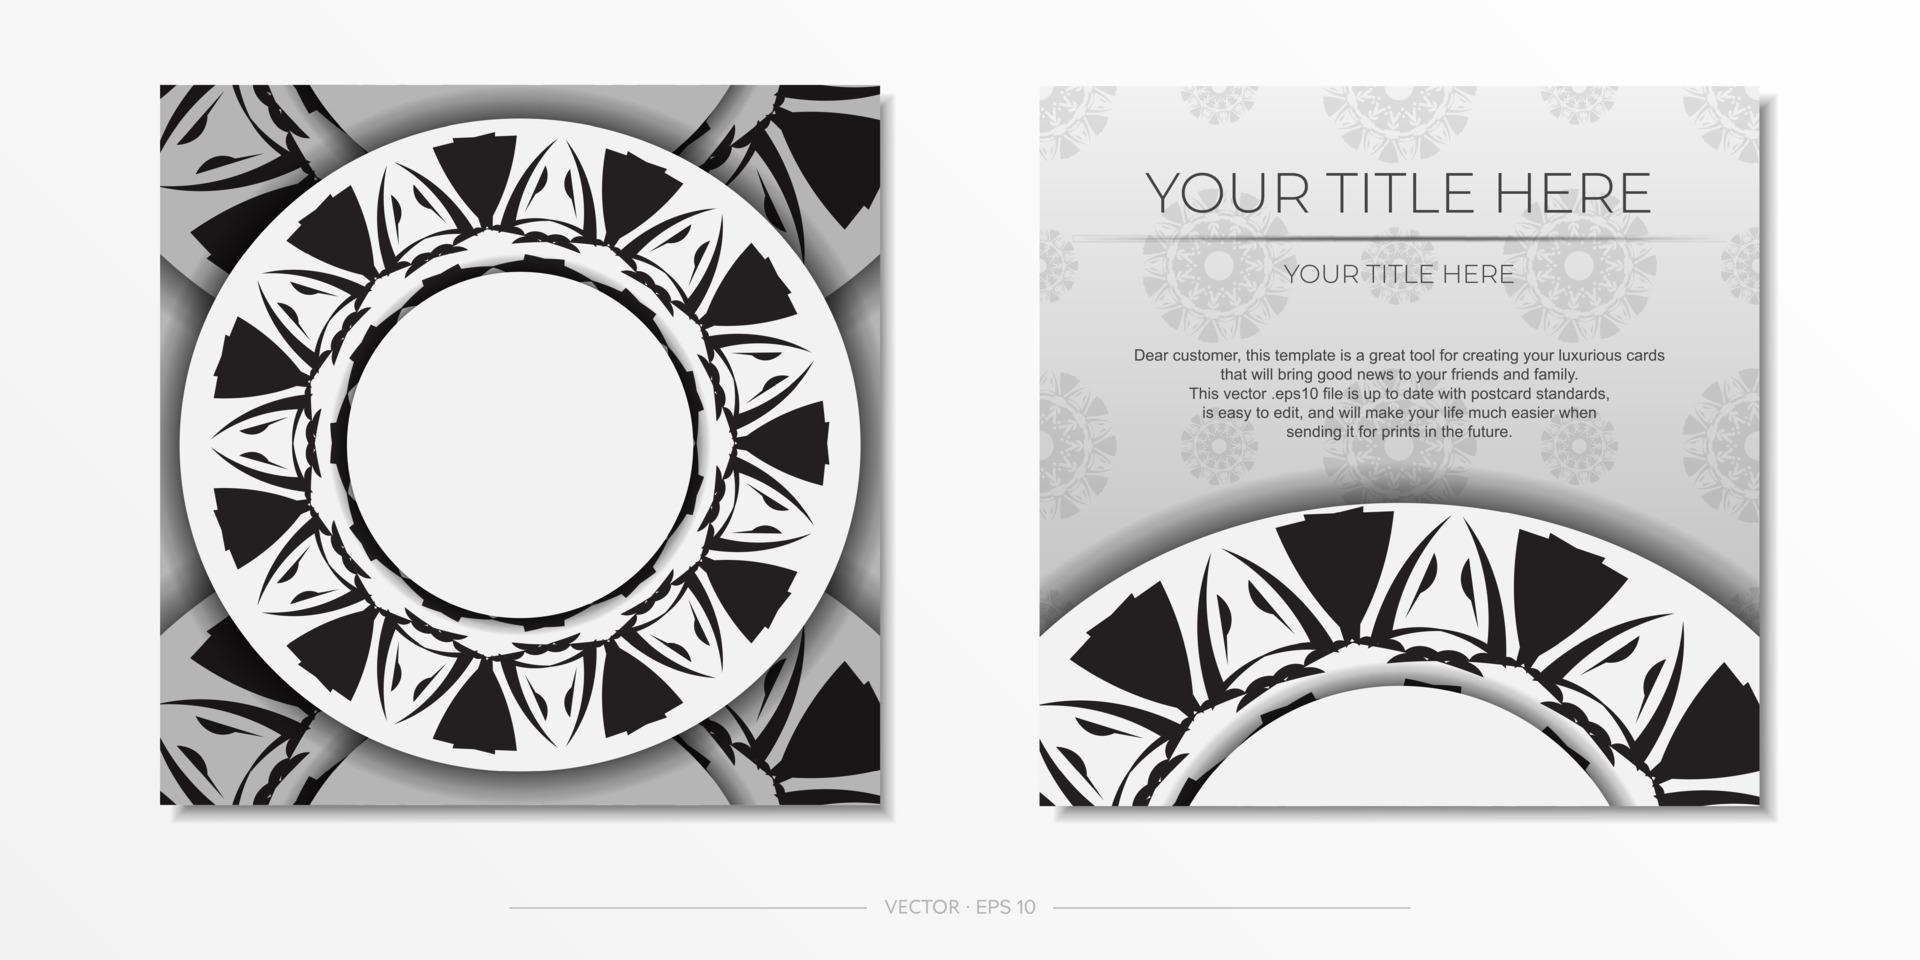 Luxurious Ready-to-Print White Color Design Postcard with Black Ornaments. Invitation template with space for your text and abstract patterns. vector